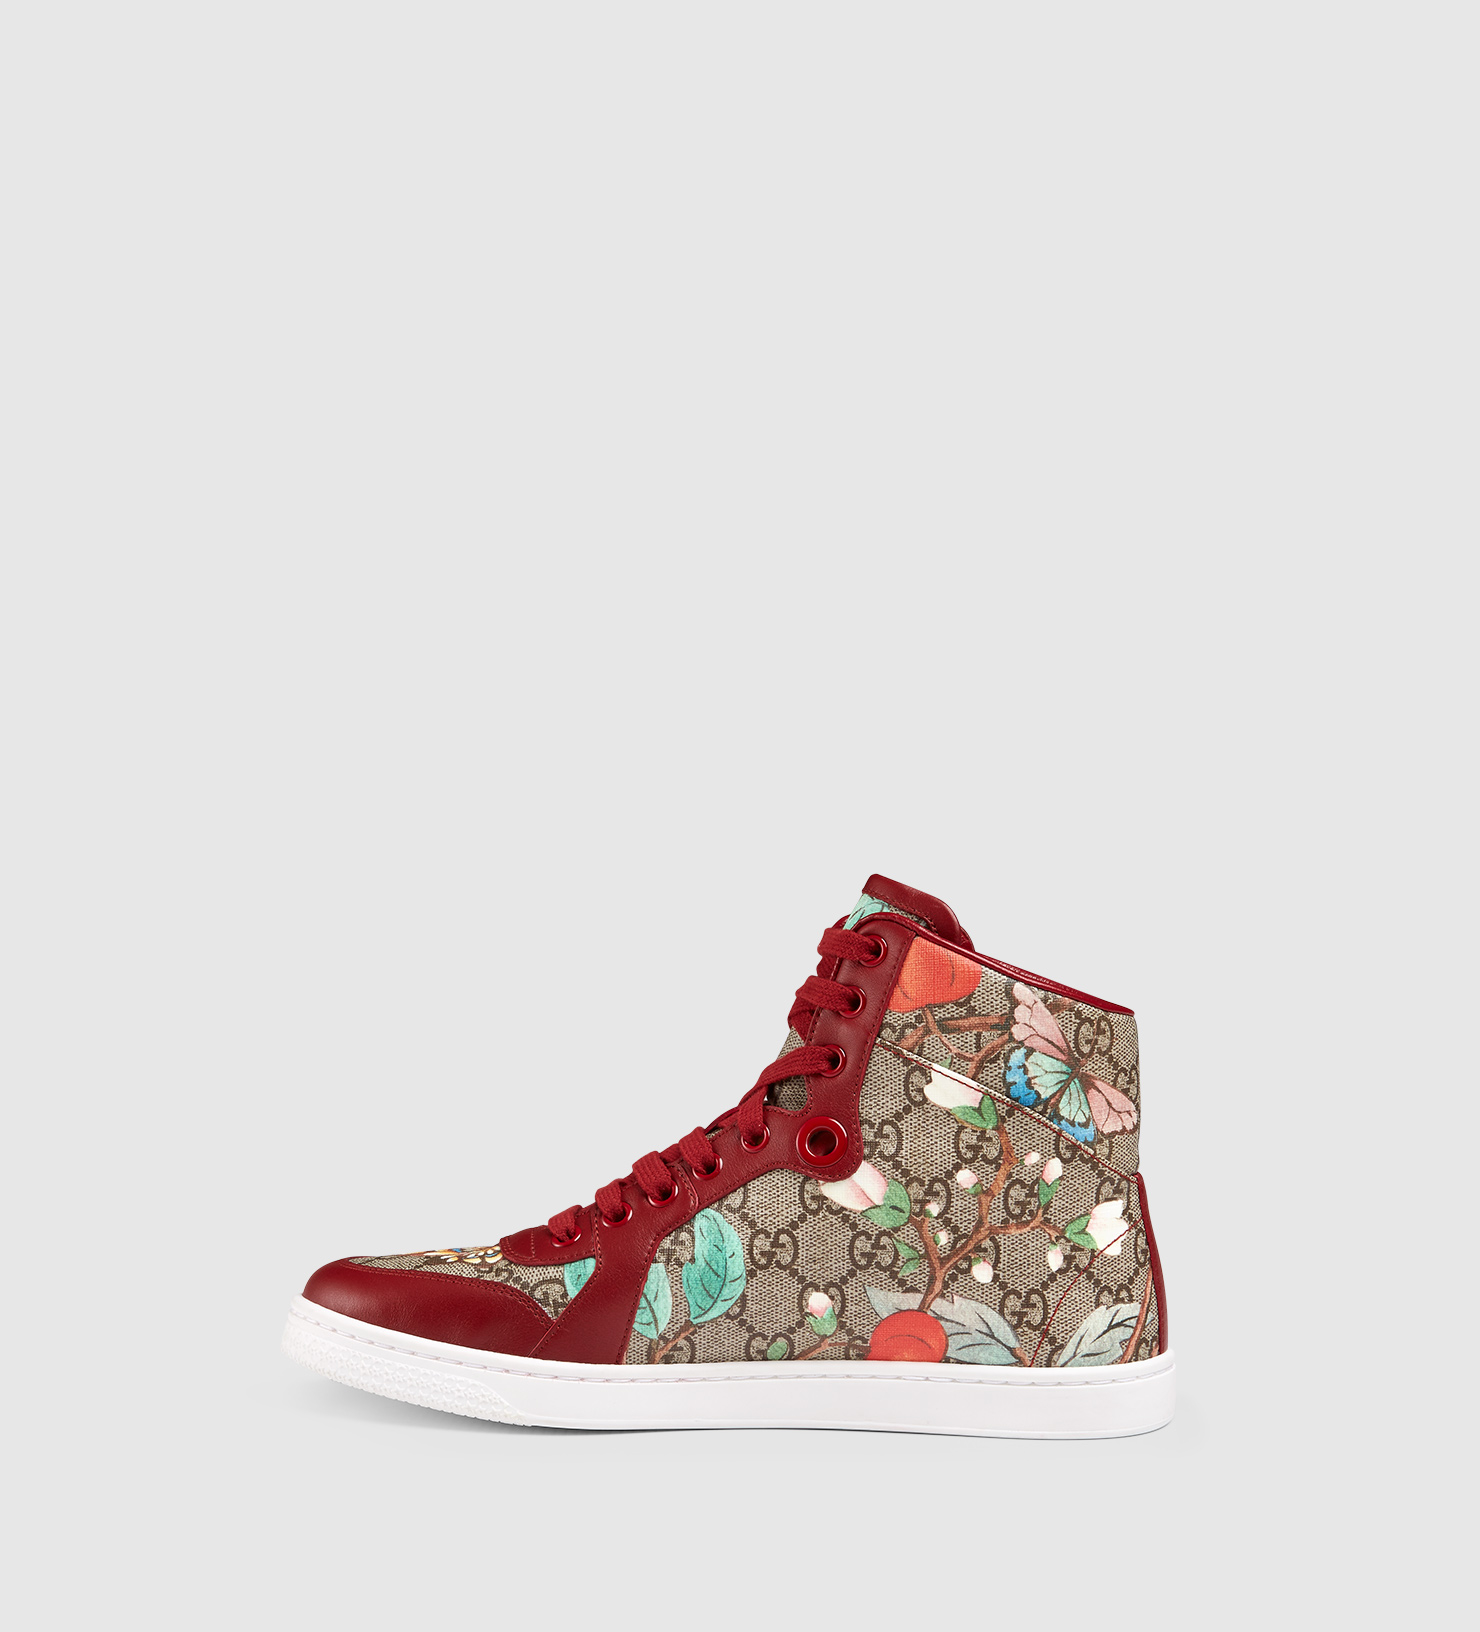 gucci womens sneakers high top